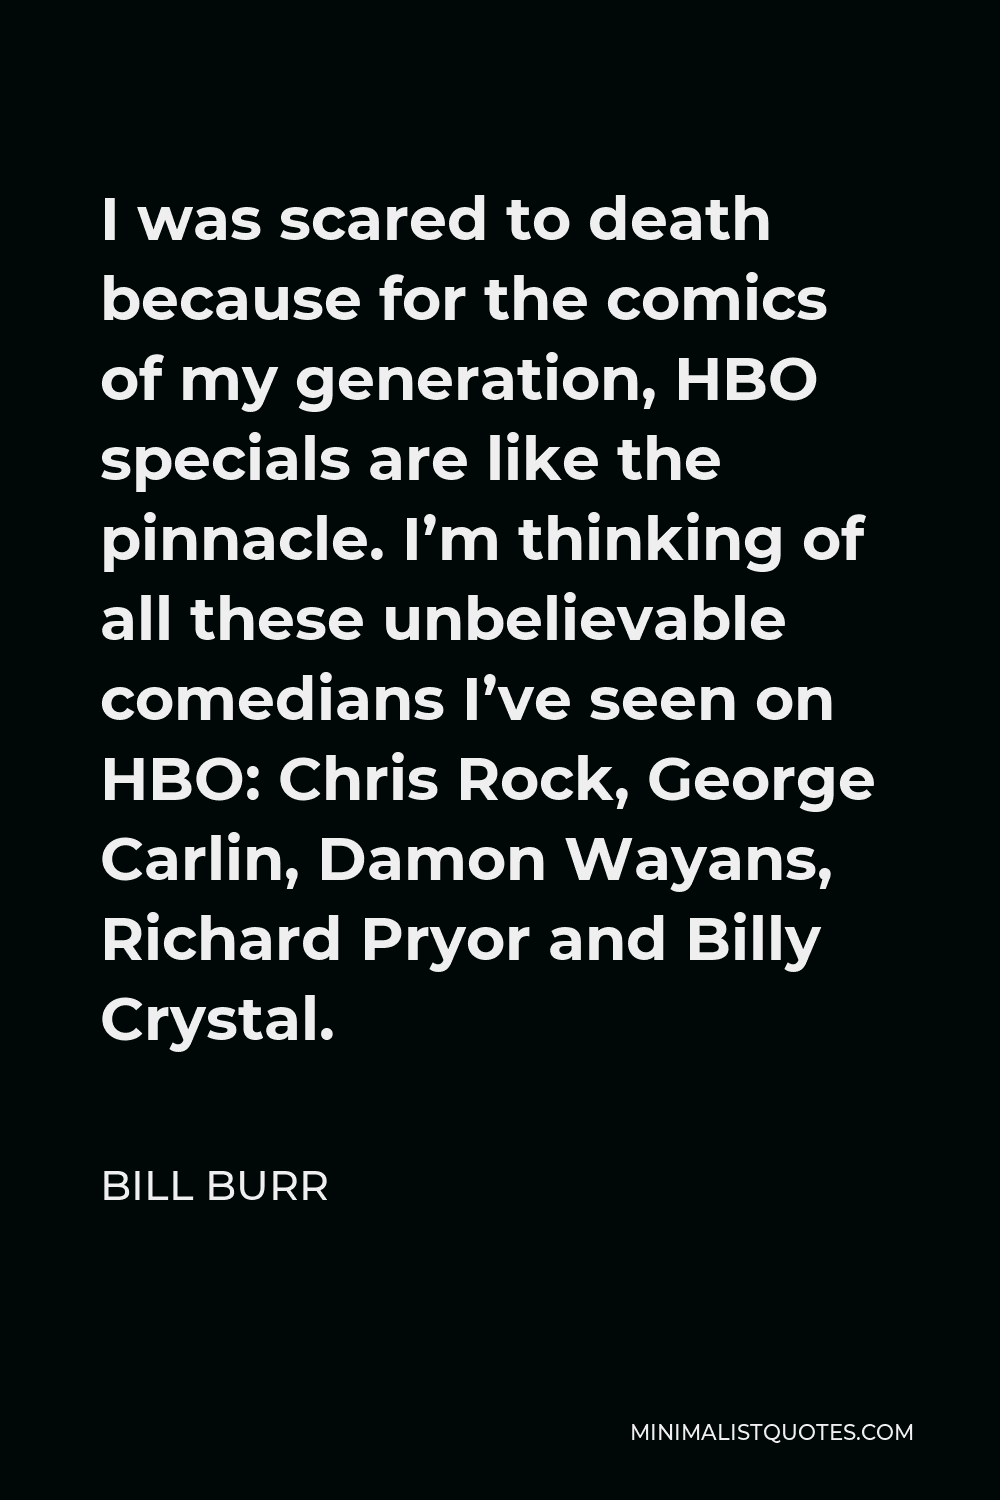 Bill Burr Quote - I was scared to death because for the comics of my generation, HBO specials are like the pinnacle. I’m thinking of all these unbelievable comedians I’ve seen on HBO: Chris Rock, George Carlin, Damon Wayans, Richard Pryor and Billy Crystal.